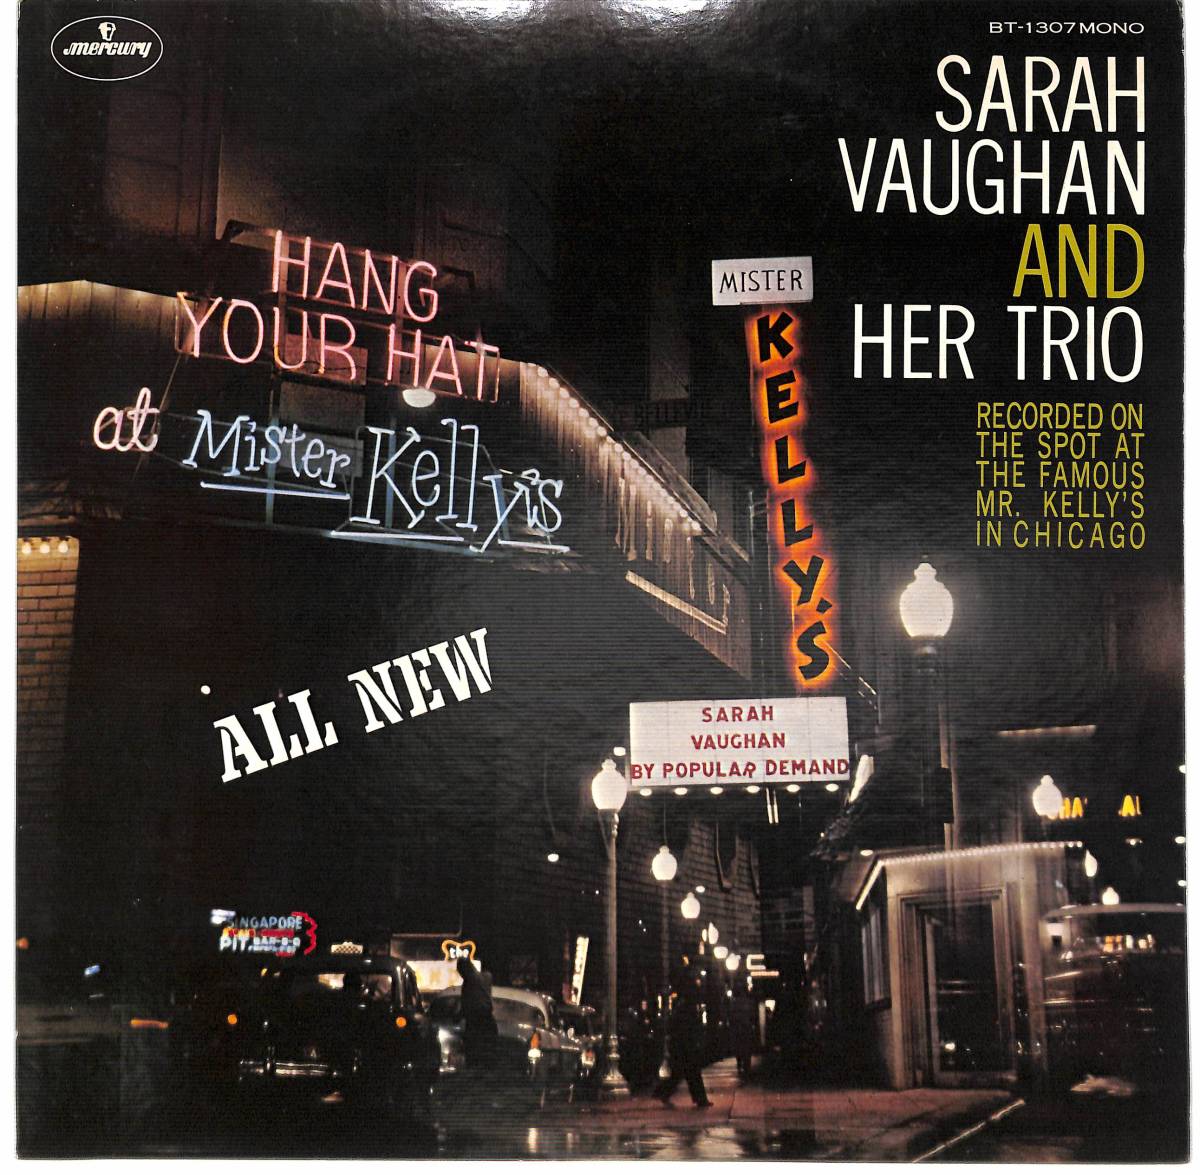 e1125/LP/Sarah Vaughan And Her Trio/Sarah Vaughan At Mister Kelly'sの画像1